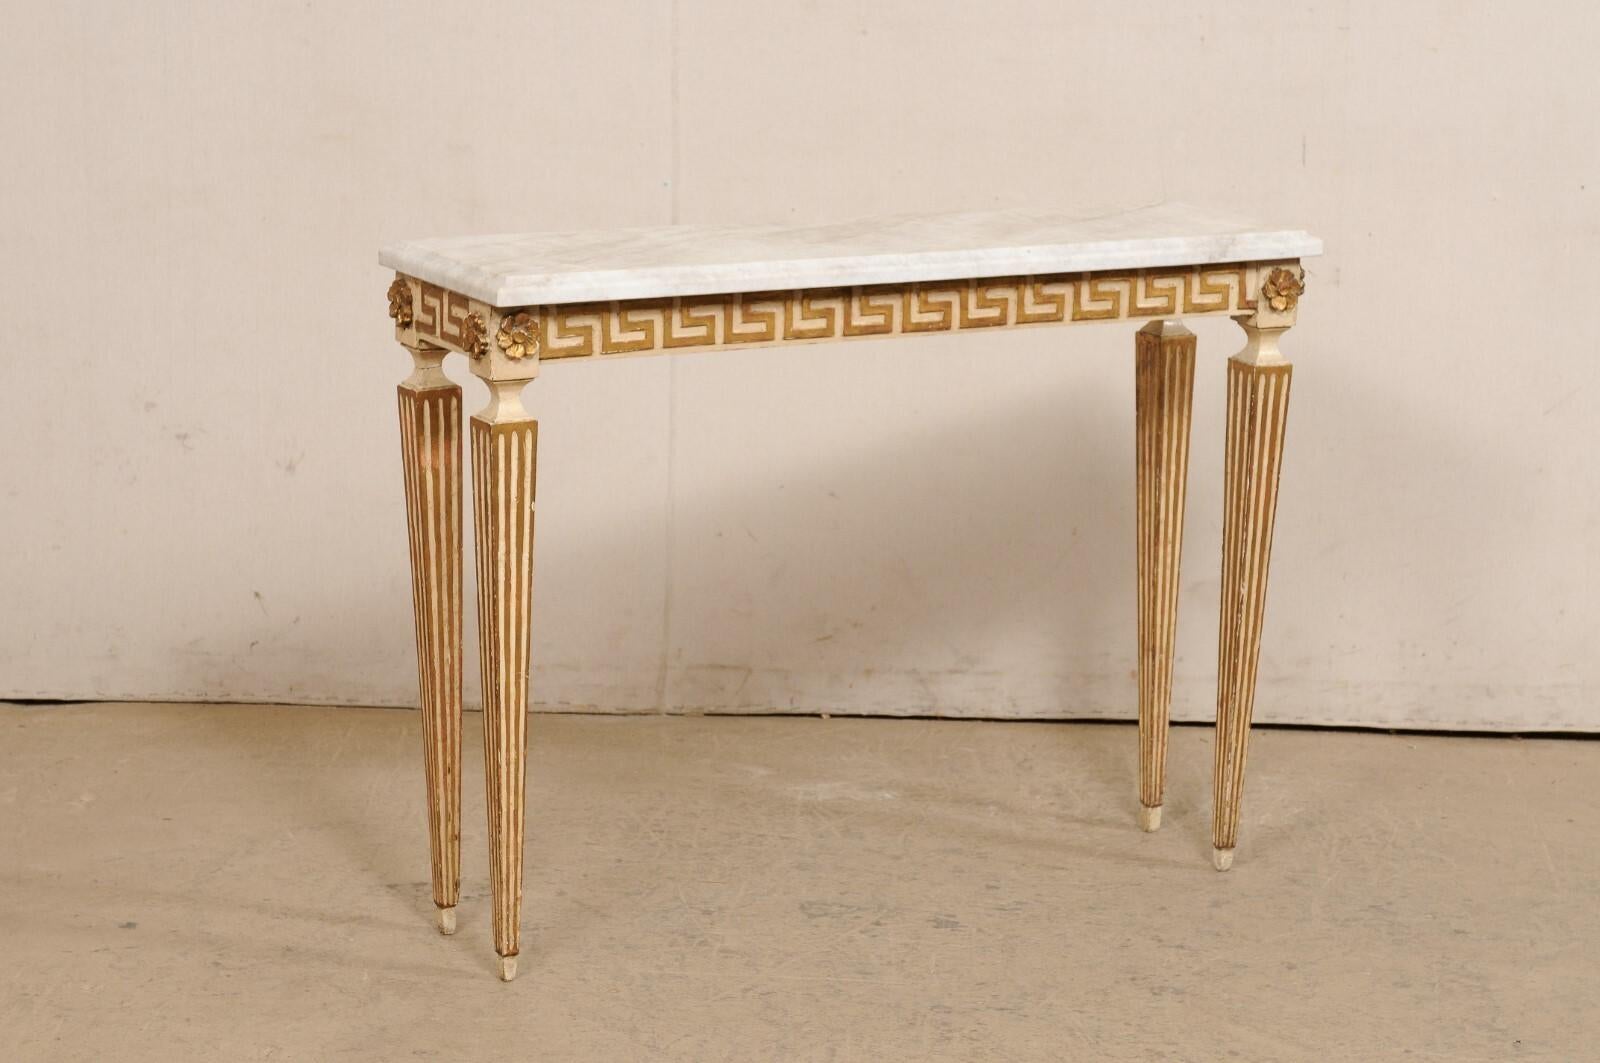 An Italian slender console table, with greek key motif and new stone top. This vintage table from Italy has a new rectangular-shaped quartzite top with beveled edges, which rests atop an apron which is adorn in a Greek key motif, with fabulous